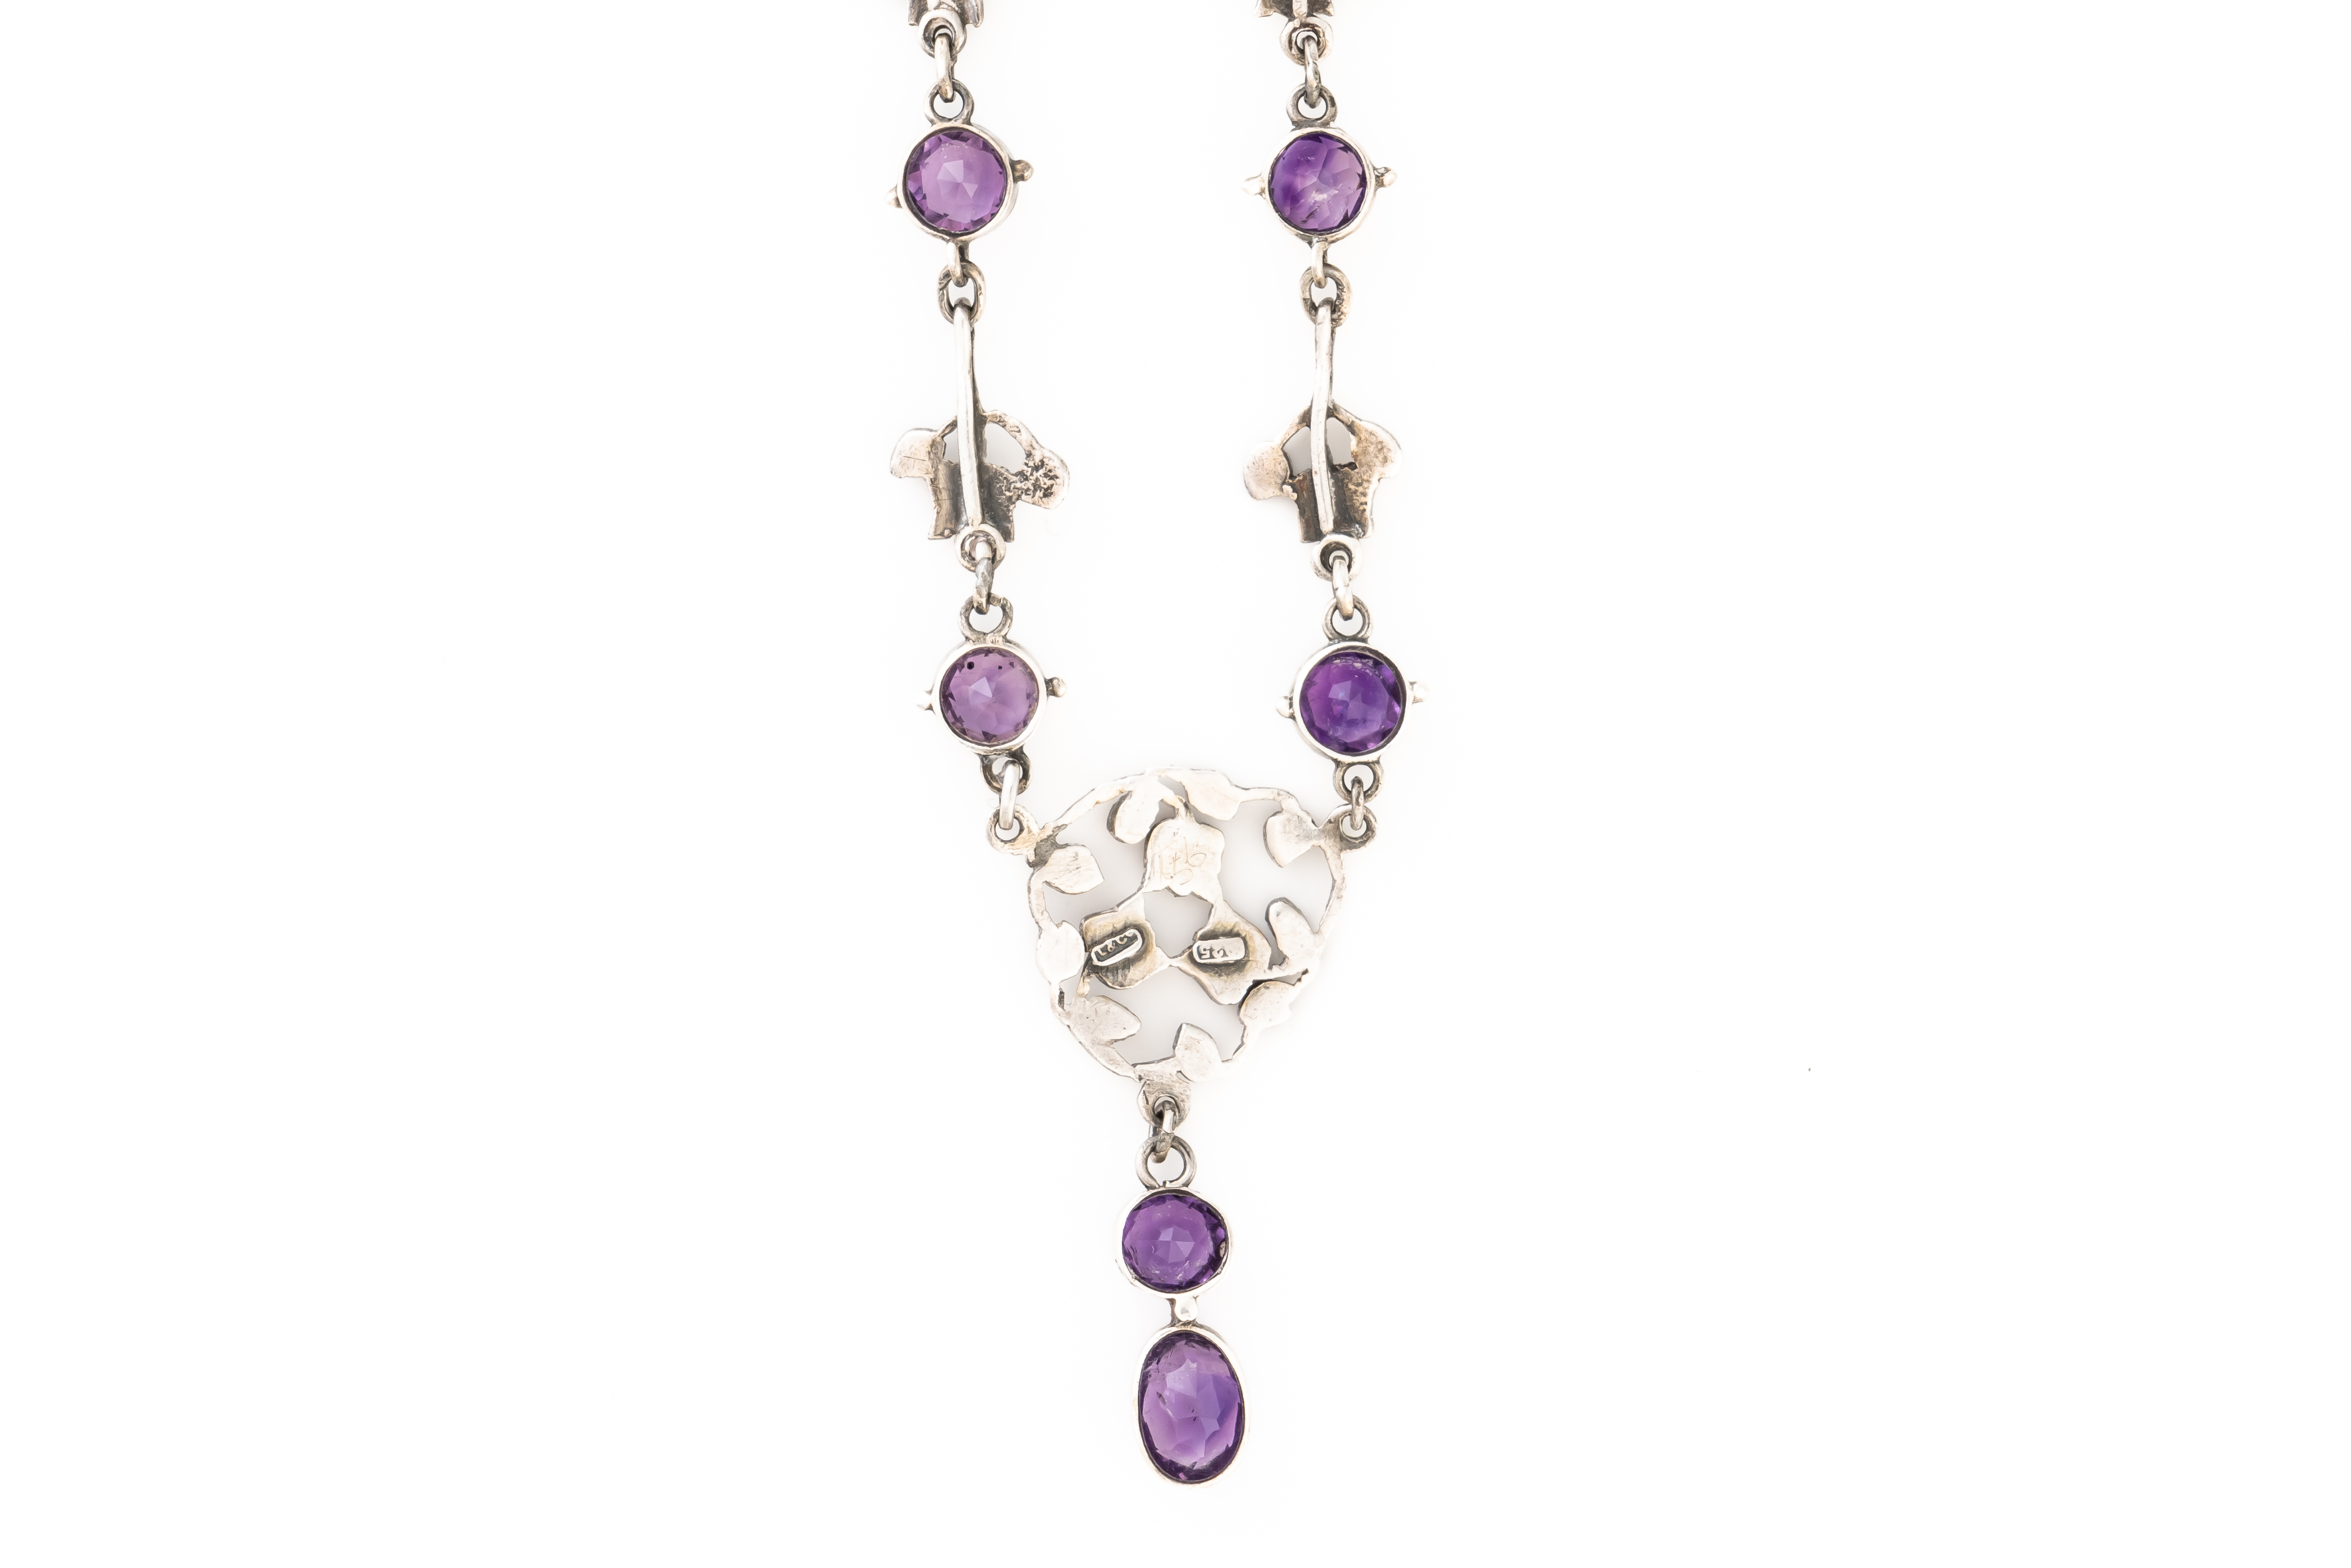 LIBERTY & CO: A SILVER, AMETHYST AND ENAMEL PENDANT NECKLACE - Image 3 of 4